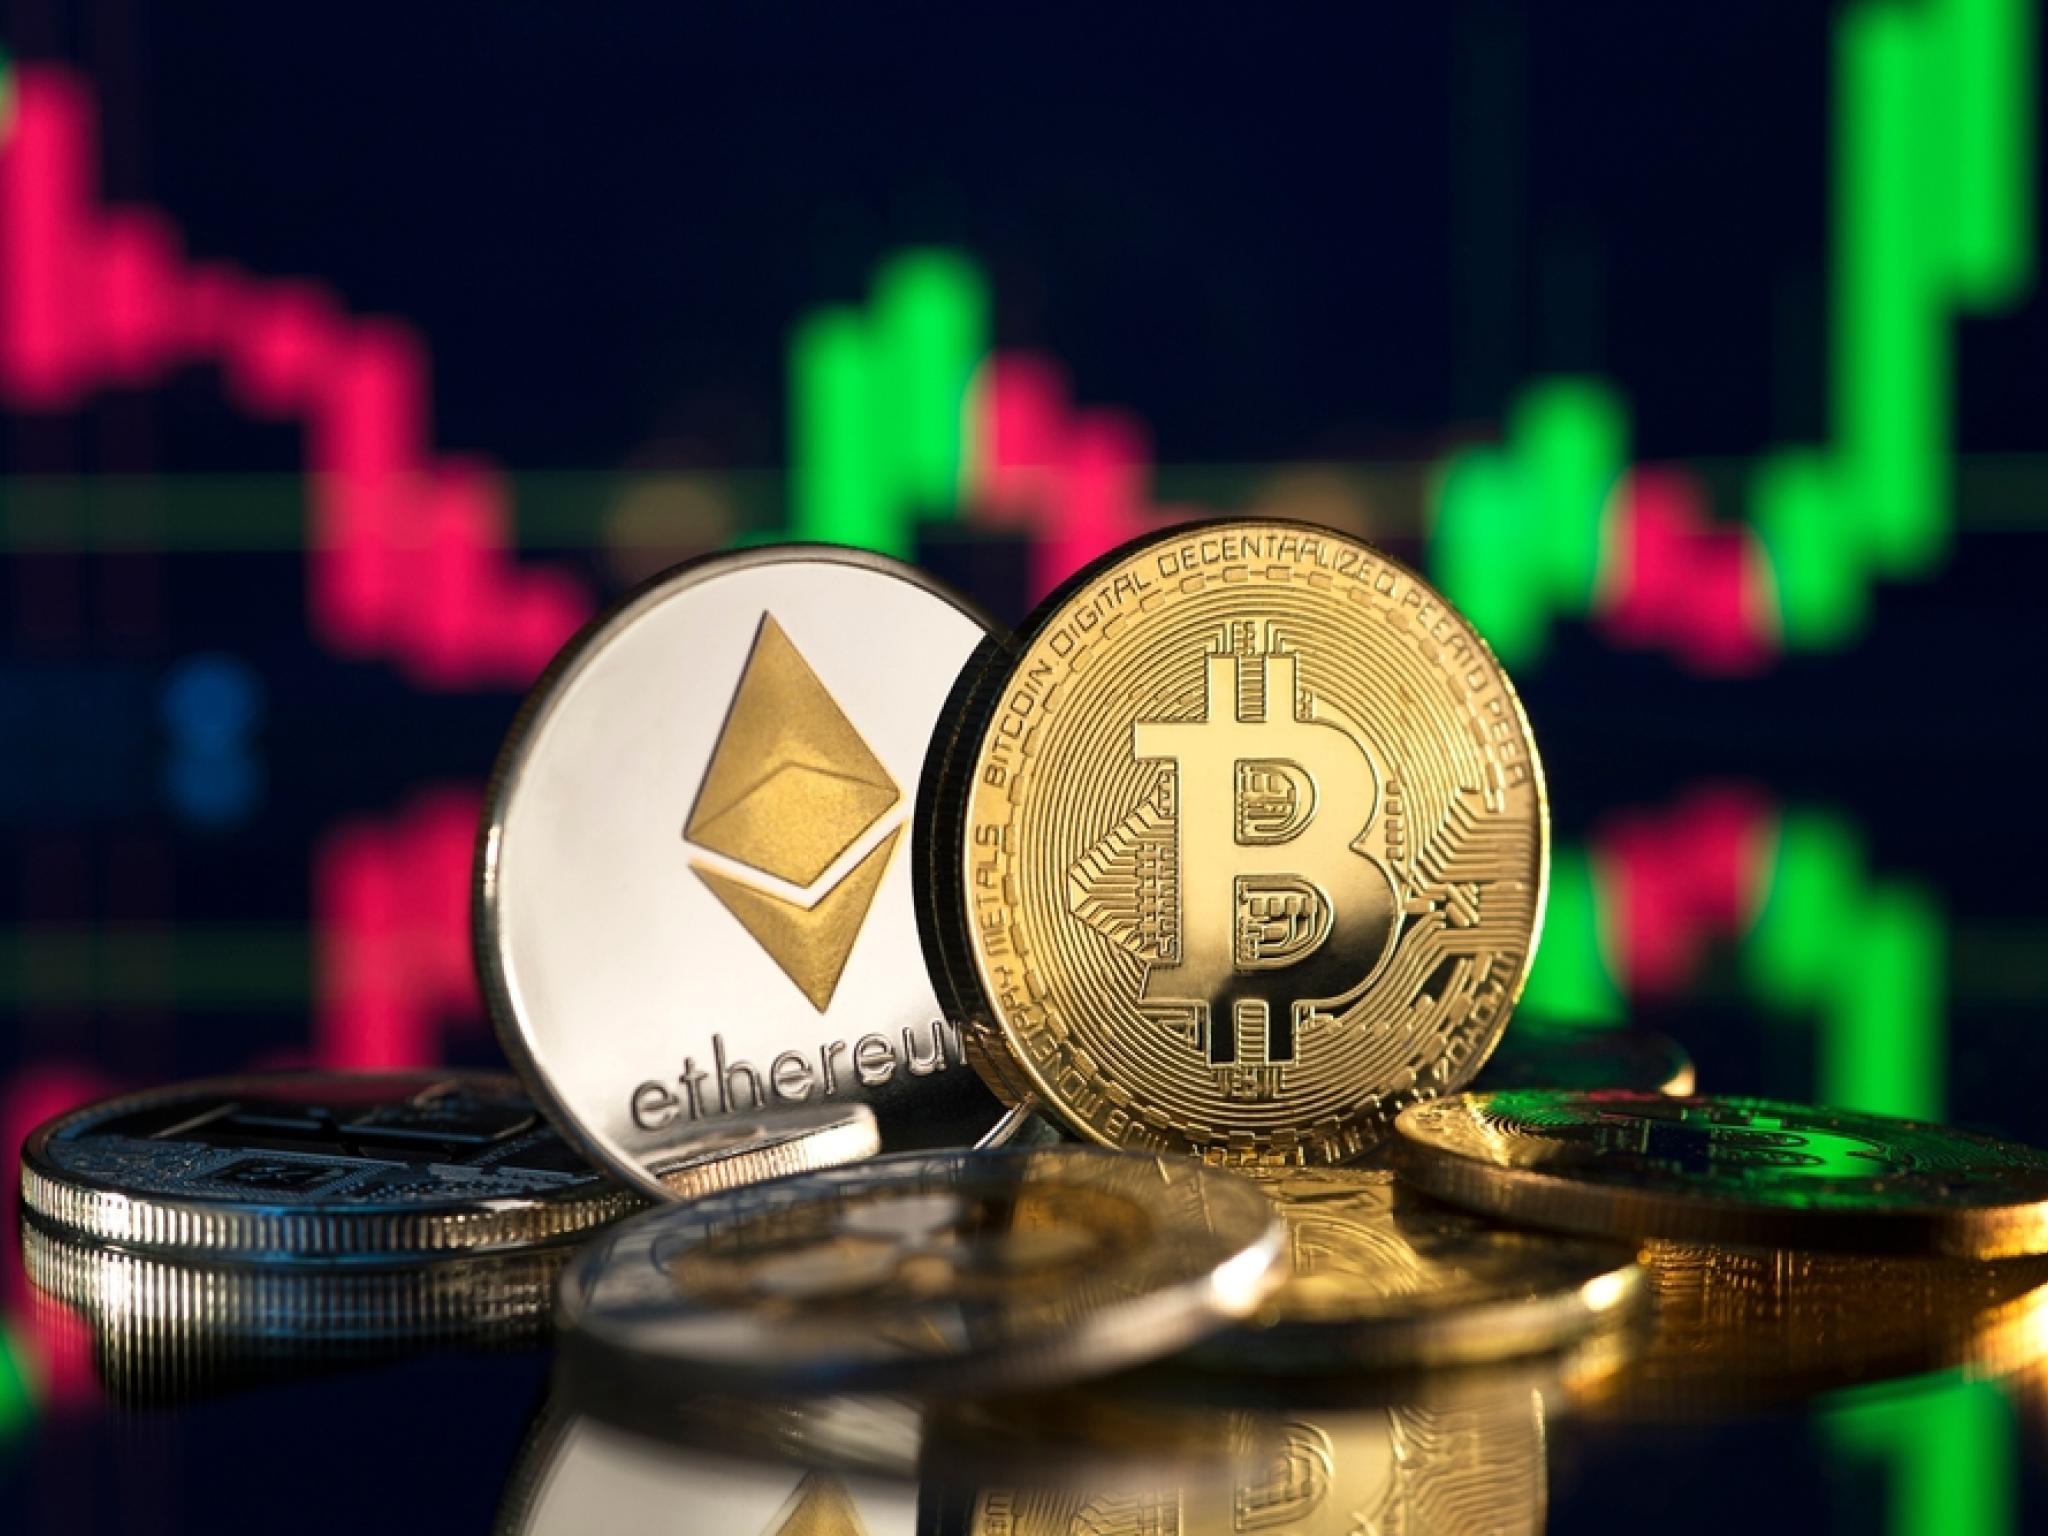  analyst-warns-ethereums-fate-is-tied-to-bitcoin-if-eth-goes-up-from-here-it-would-only-be-due-to 